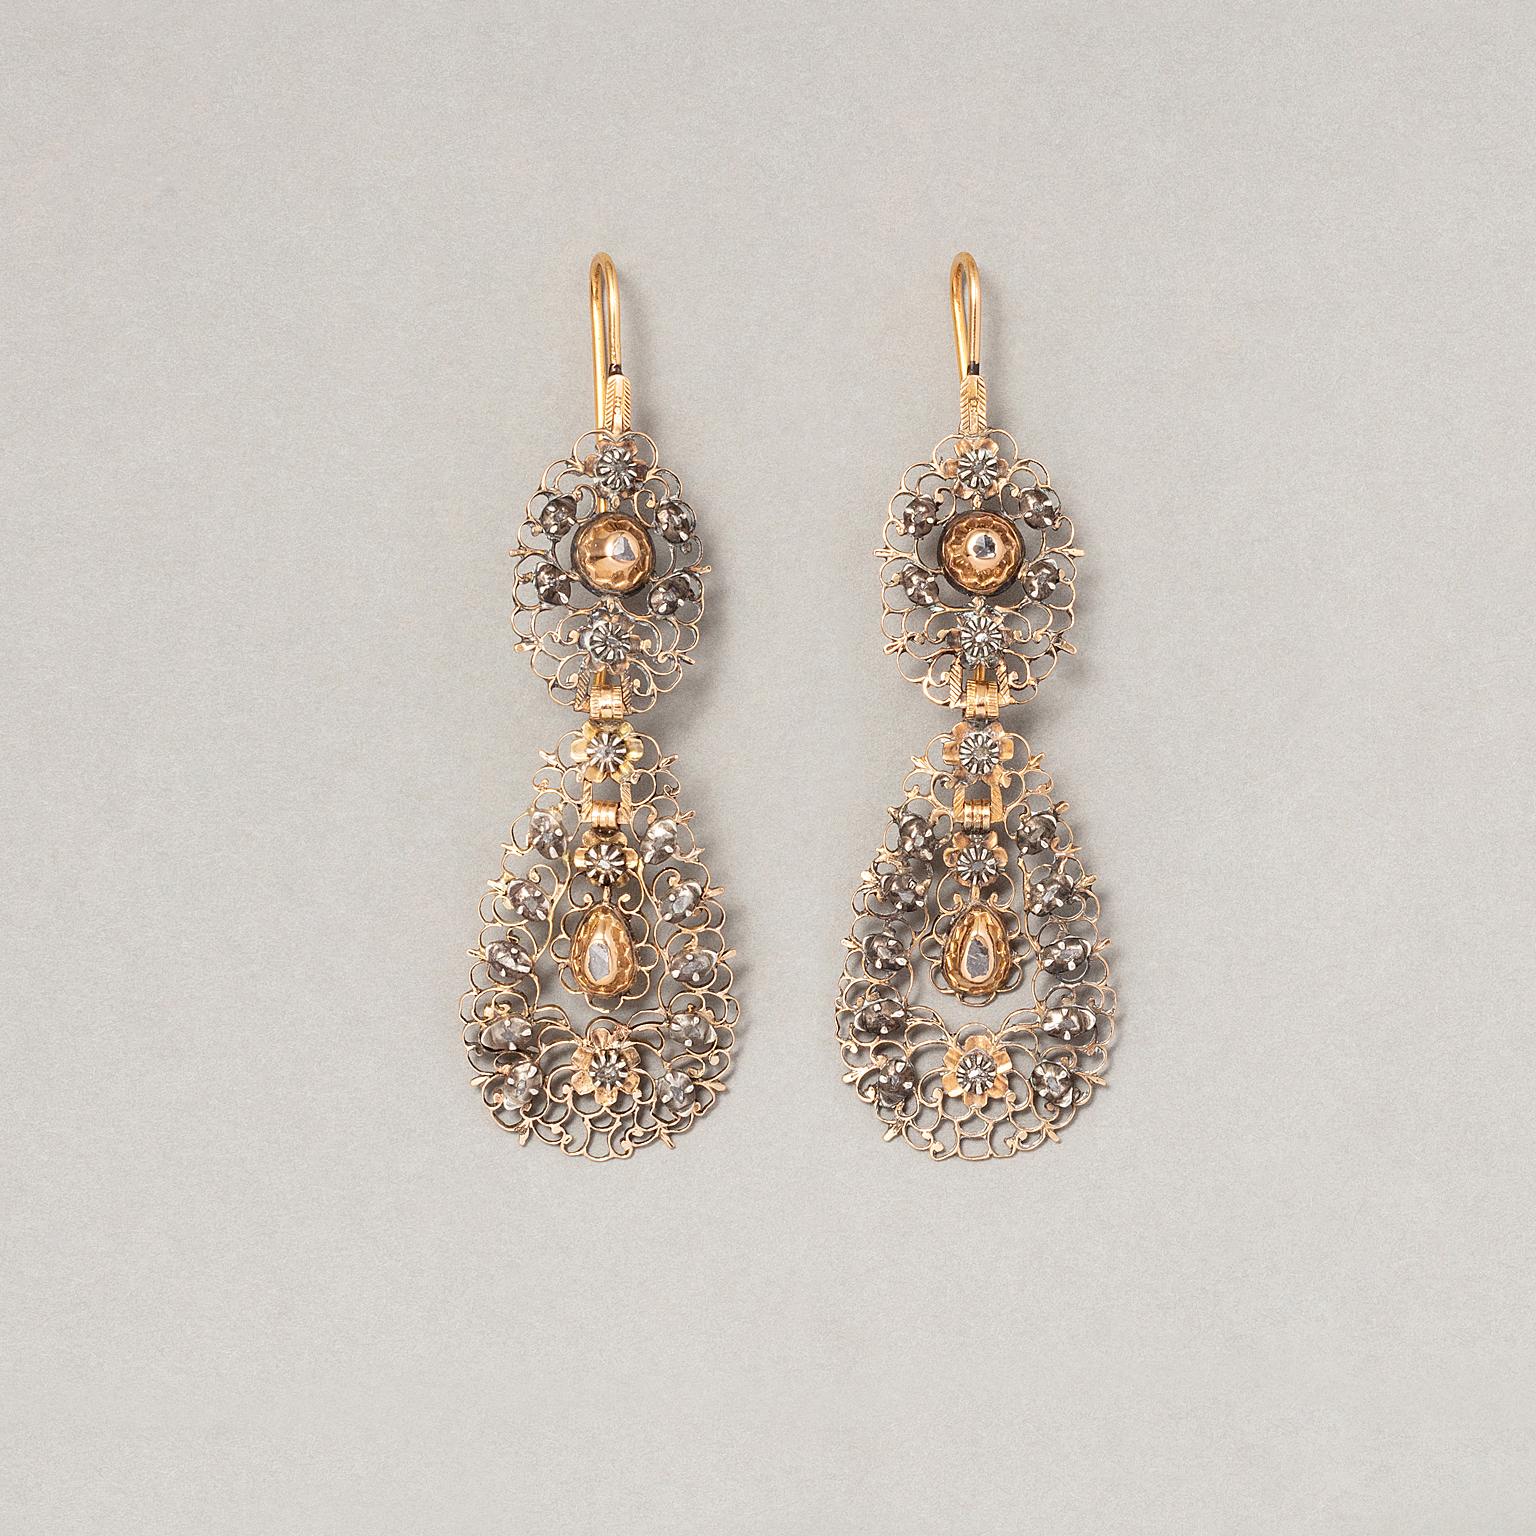 A pair of 15 carat gold and silver Georgian Flemish long earrings, with a lace like design, the earrings have been constructed from gold plate completely open worked with scrolls and flowers decorated with rose cut diamonds set in gold and silver,